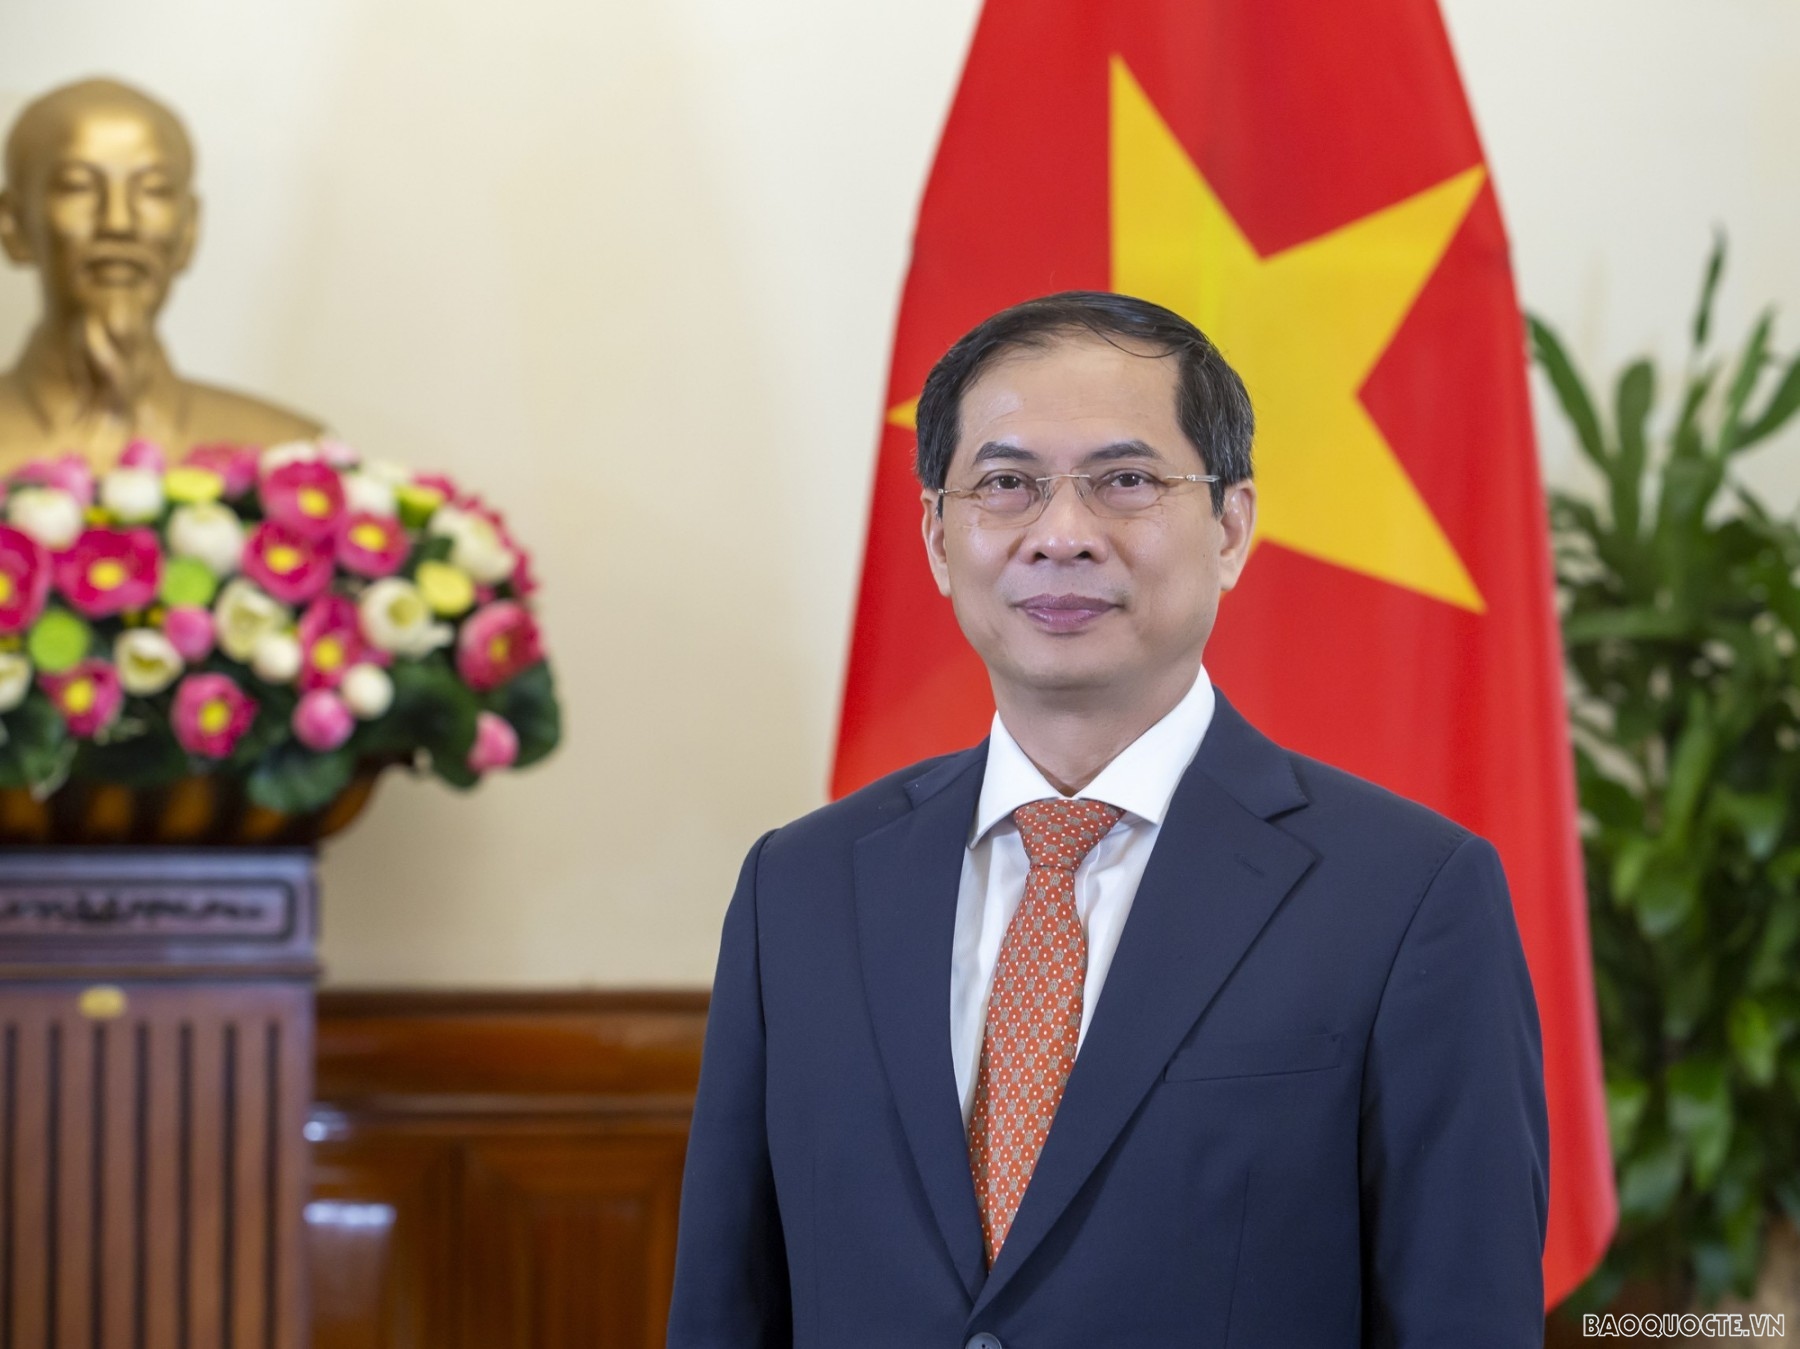 Congratulatory letter of the Minister of Foreign Affairs Bui Thanh Son